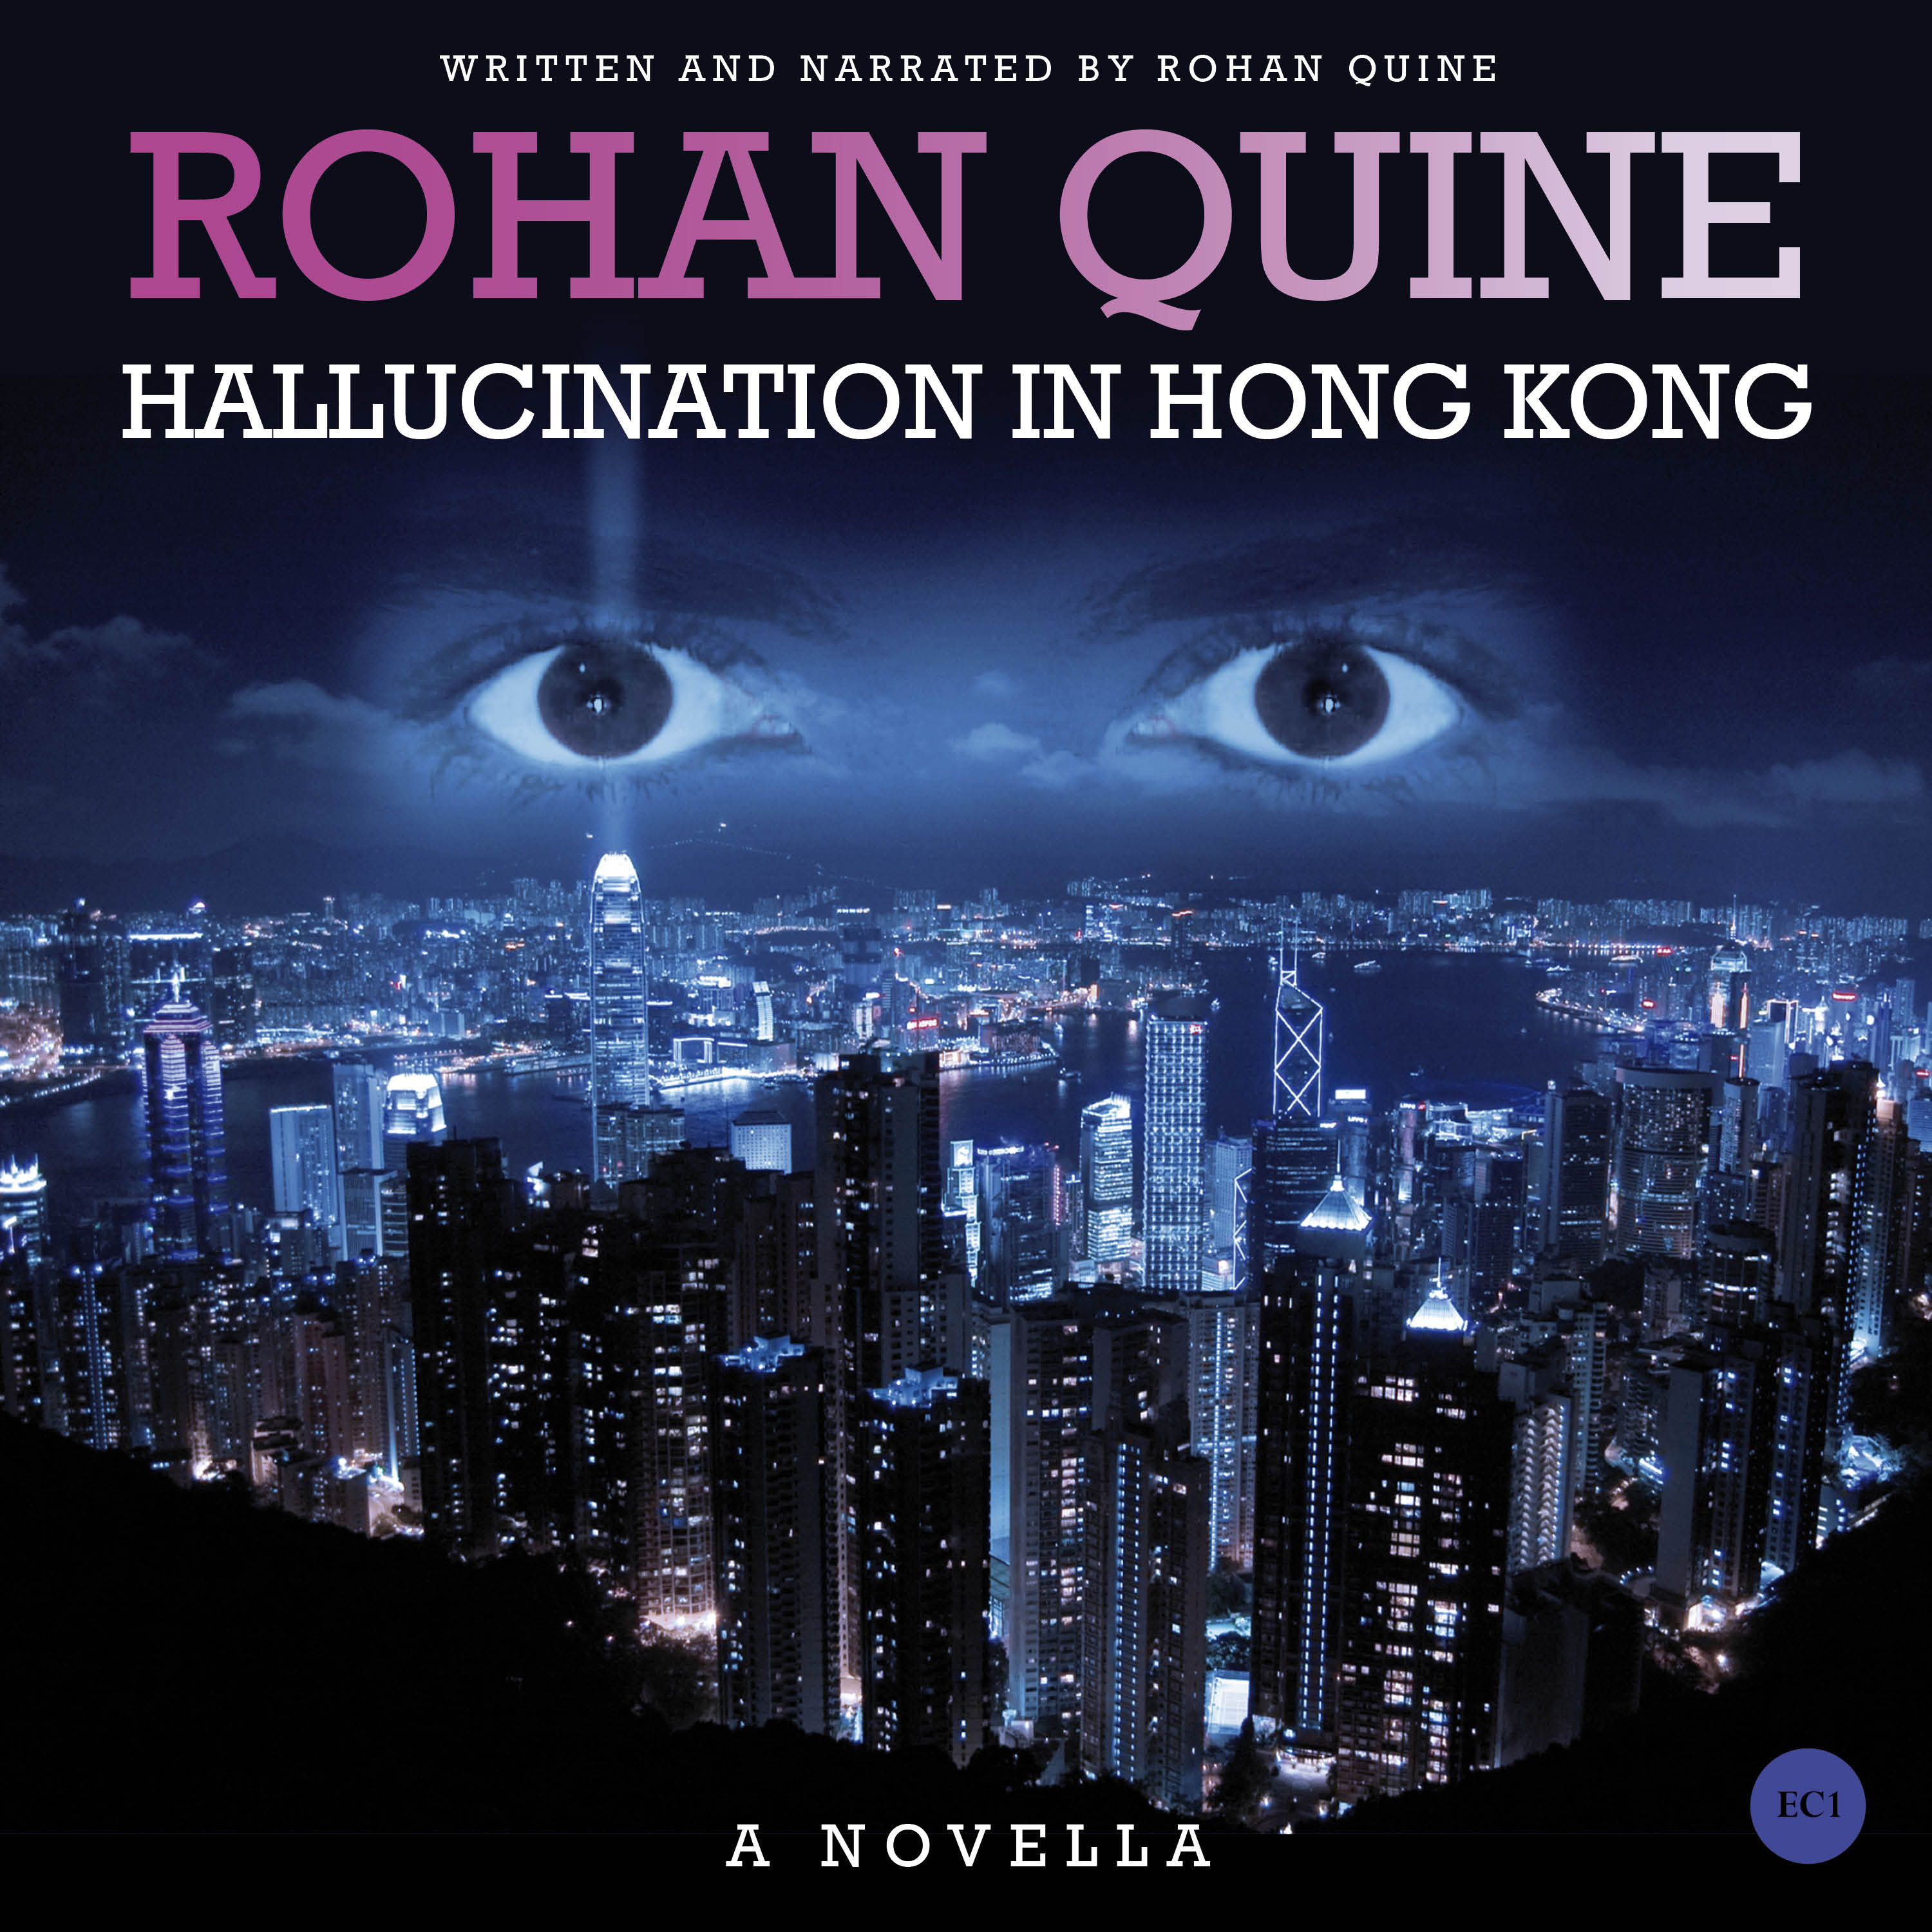 HALLUCINATION IN HONG KONG (novella) by Rohan Quine - audiobook cover (literary fiction, magical realism, horror)